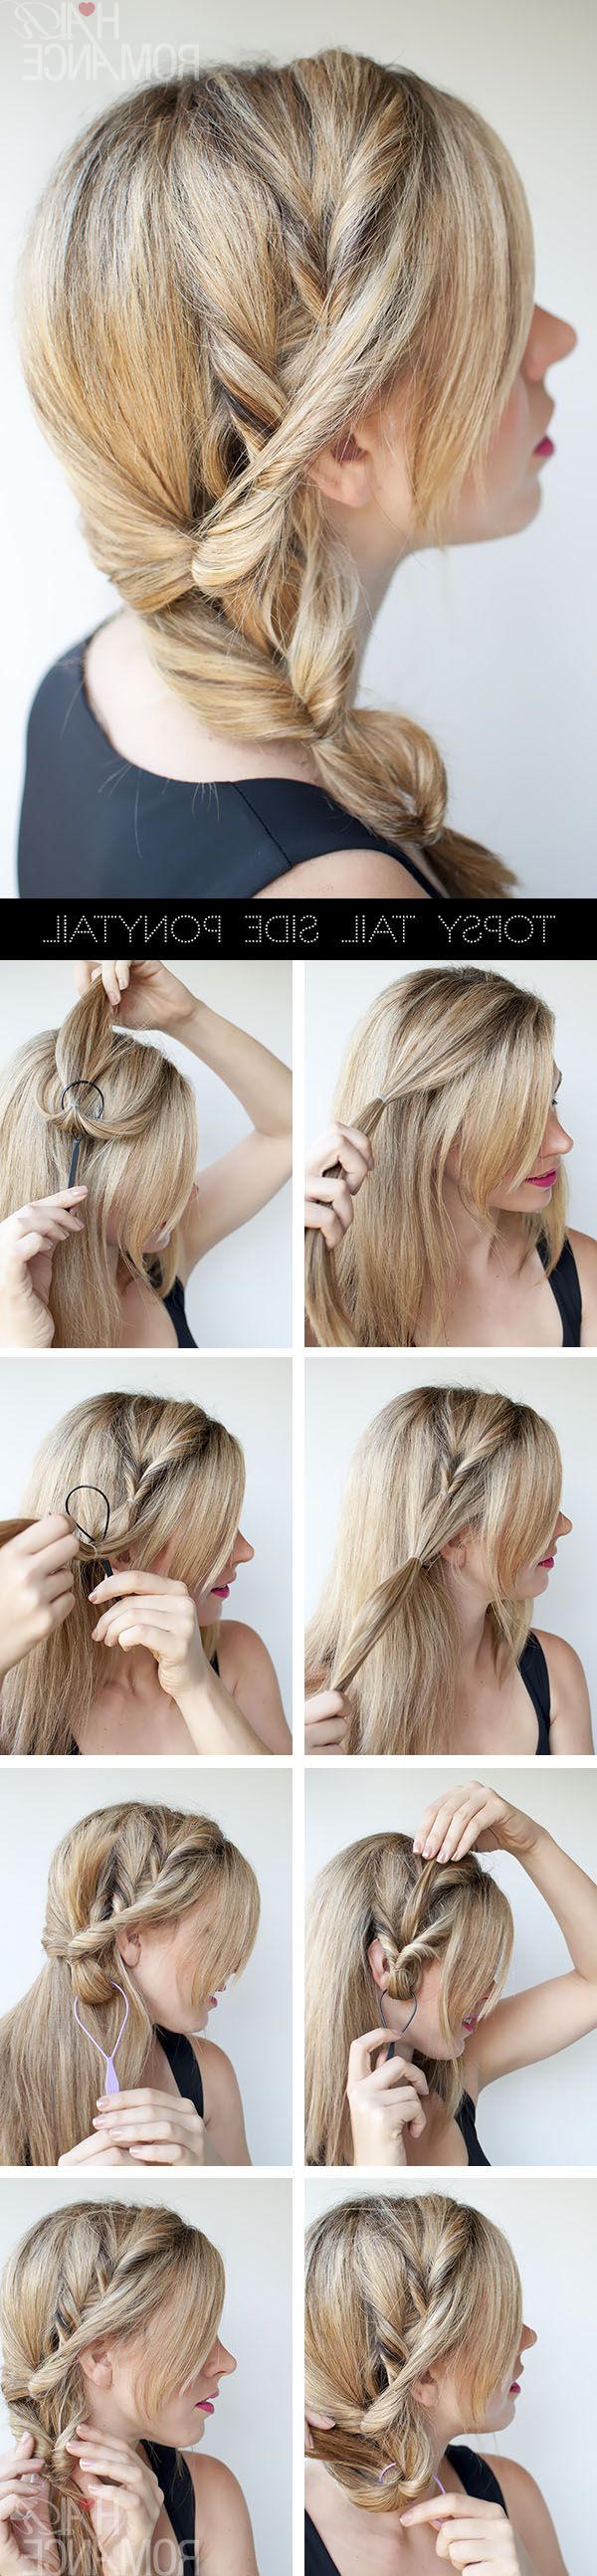 Most Popular Romantic Ponytail Updo Hairstyles With Topsy Tail Ponytail Tutorial – The No Braid Side Braid (View 13 of 20)